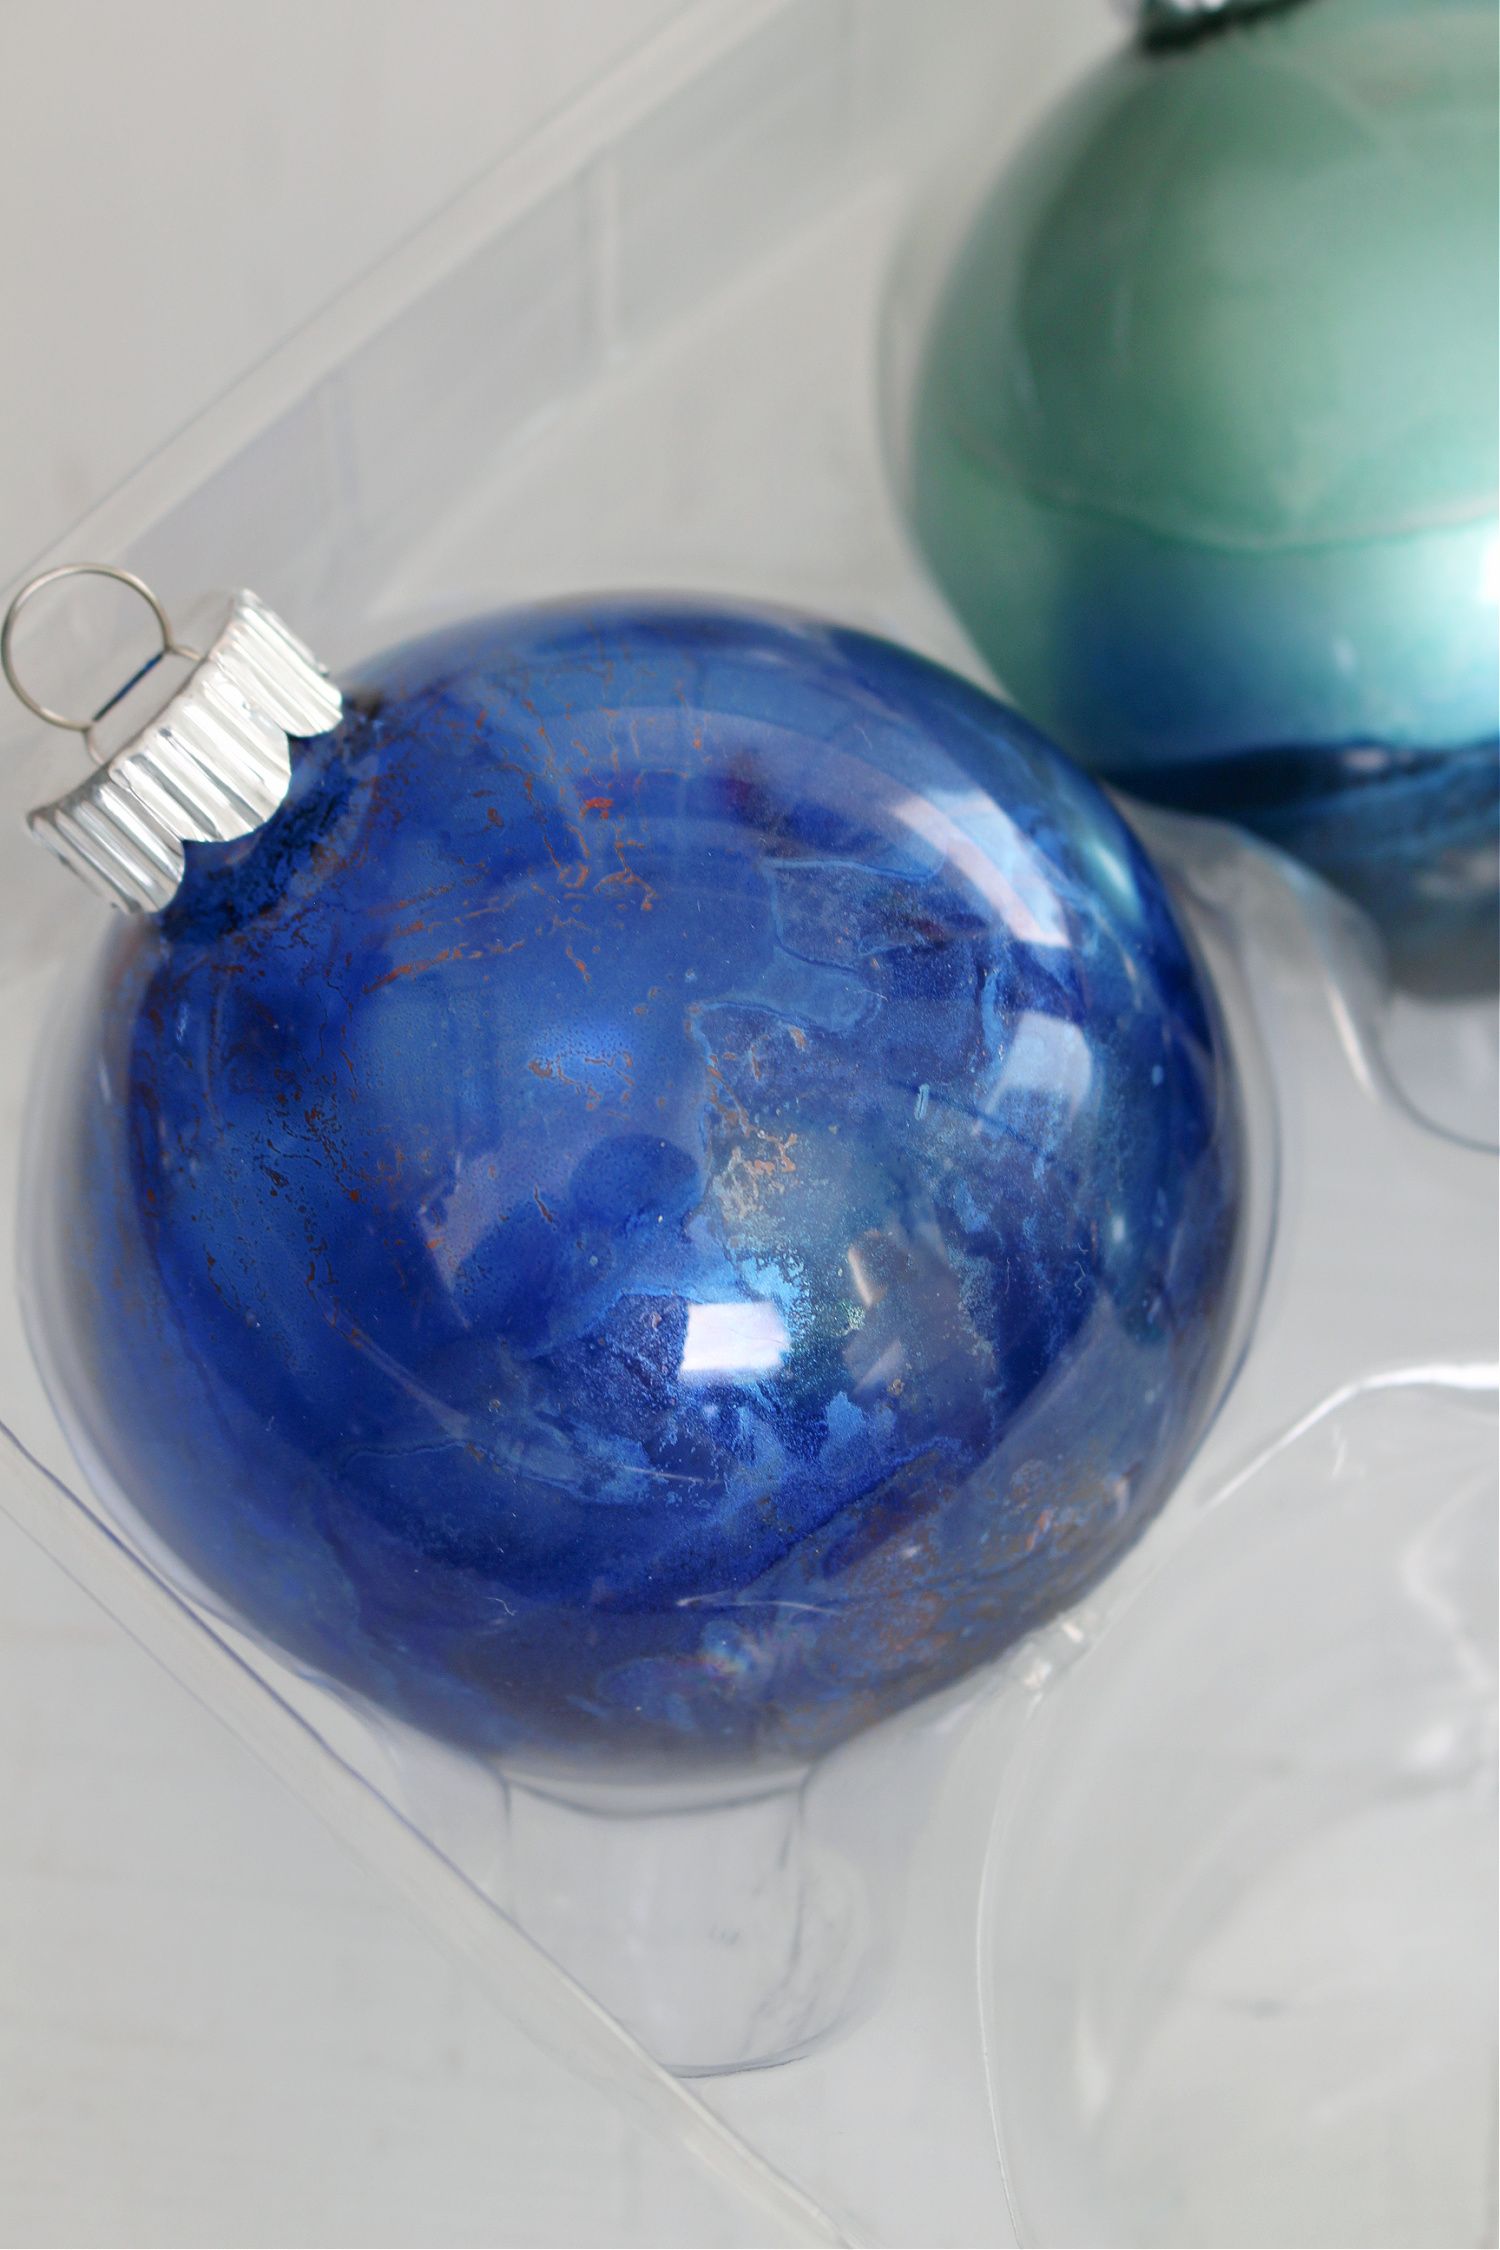 Can Alcohol Ink Be Used on Glass? YES!